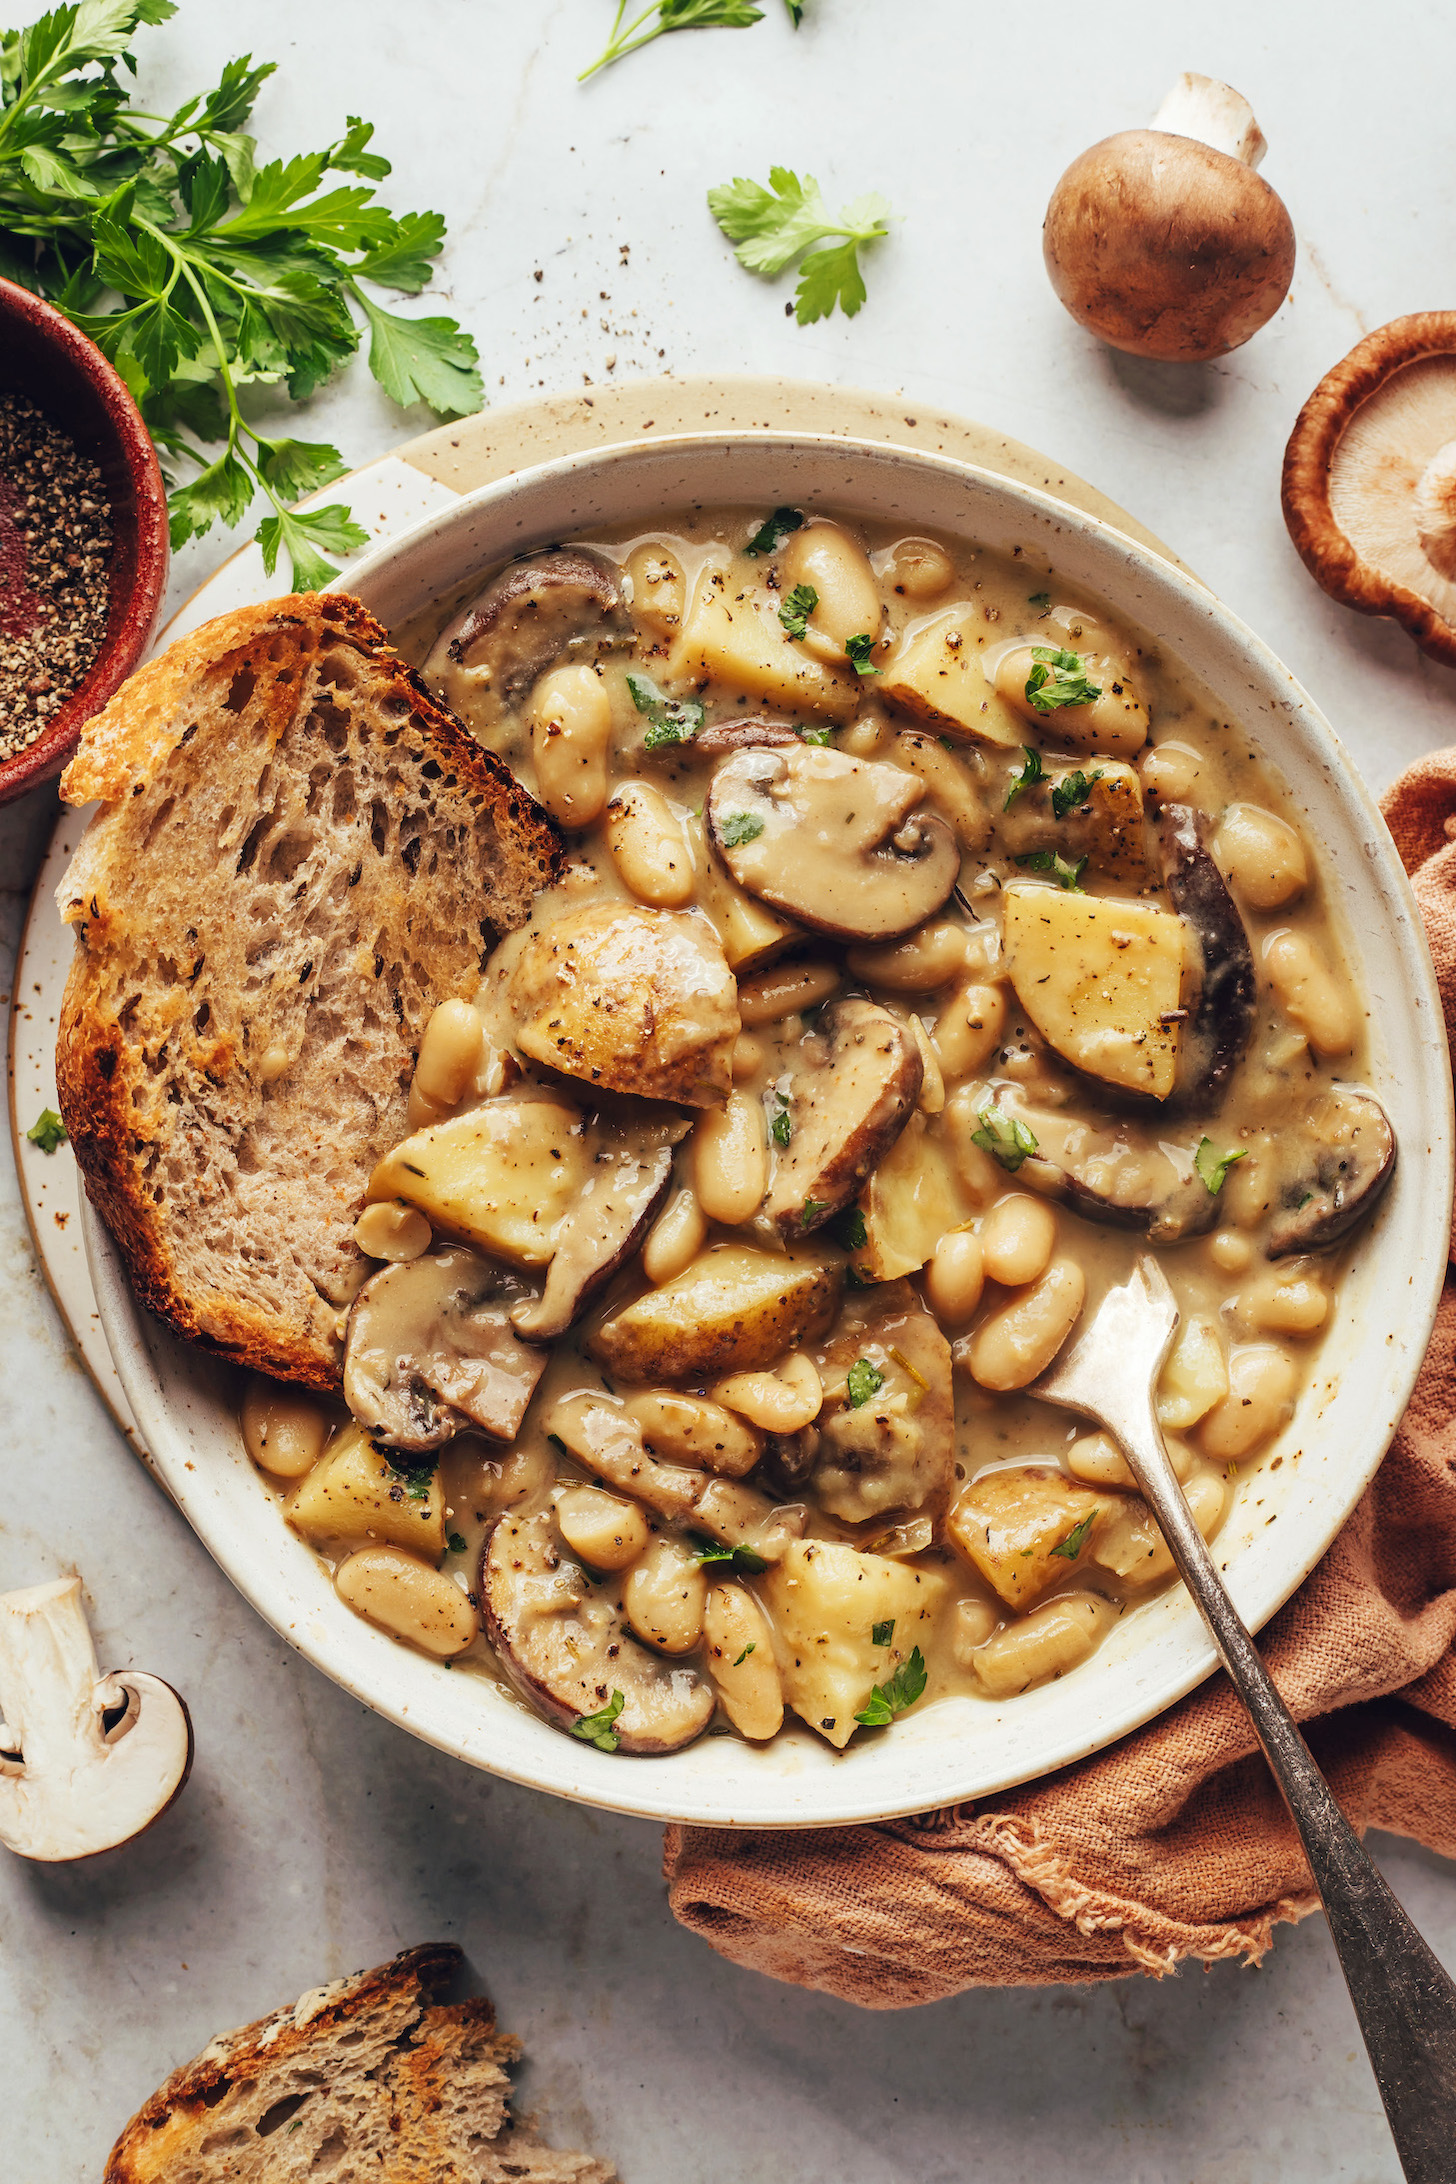 Mushrooms, parsley, and black pepper around a bowl of white bean mushroom stew with a slice of toasted bread in it